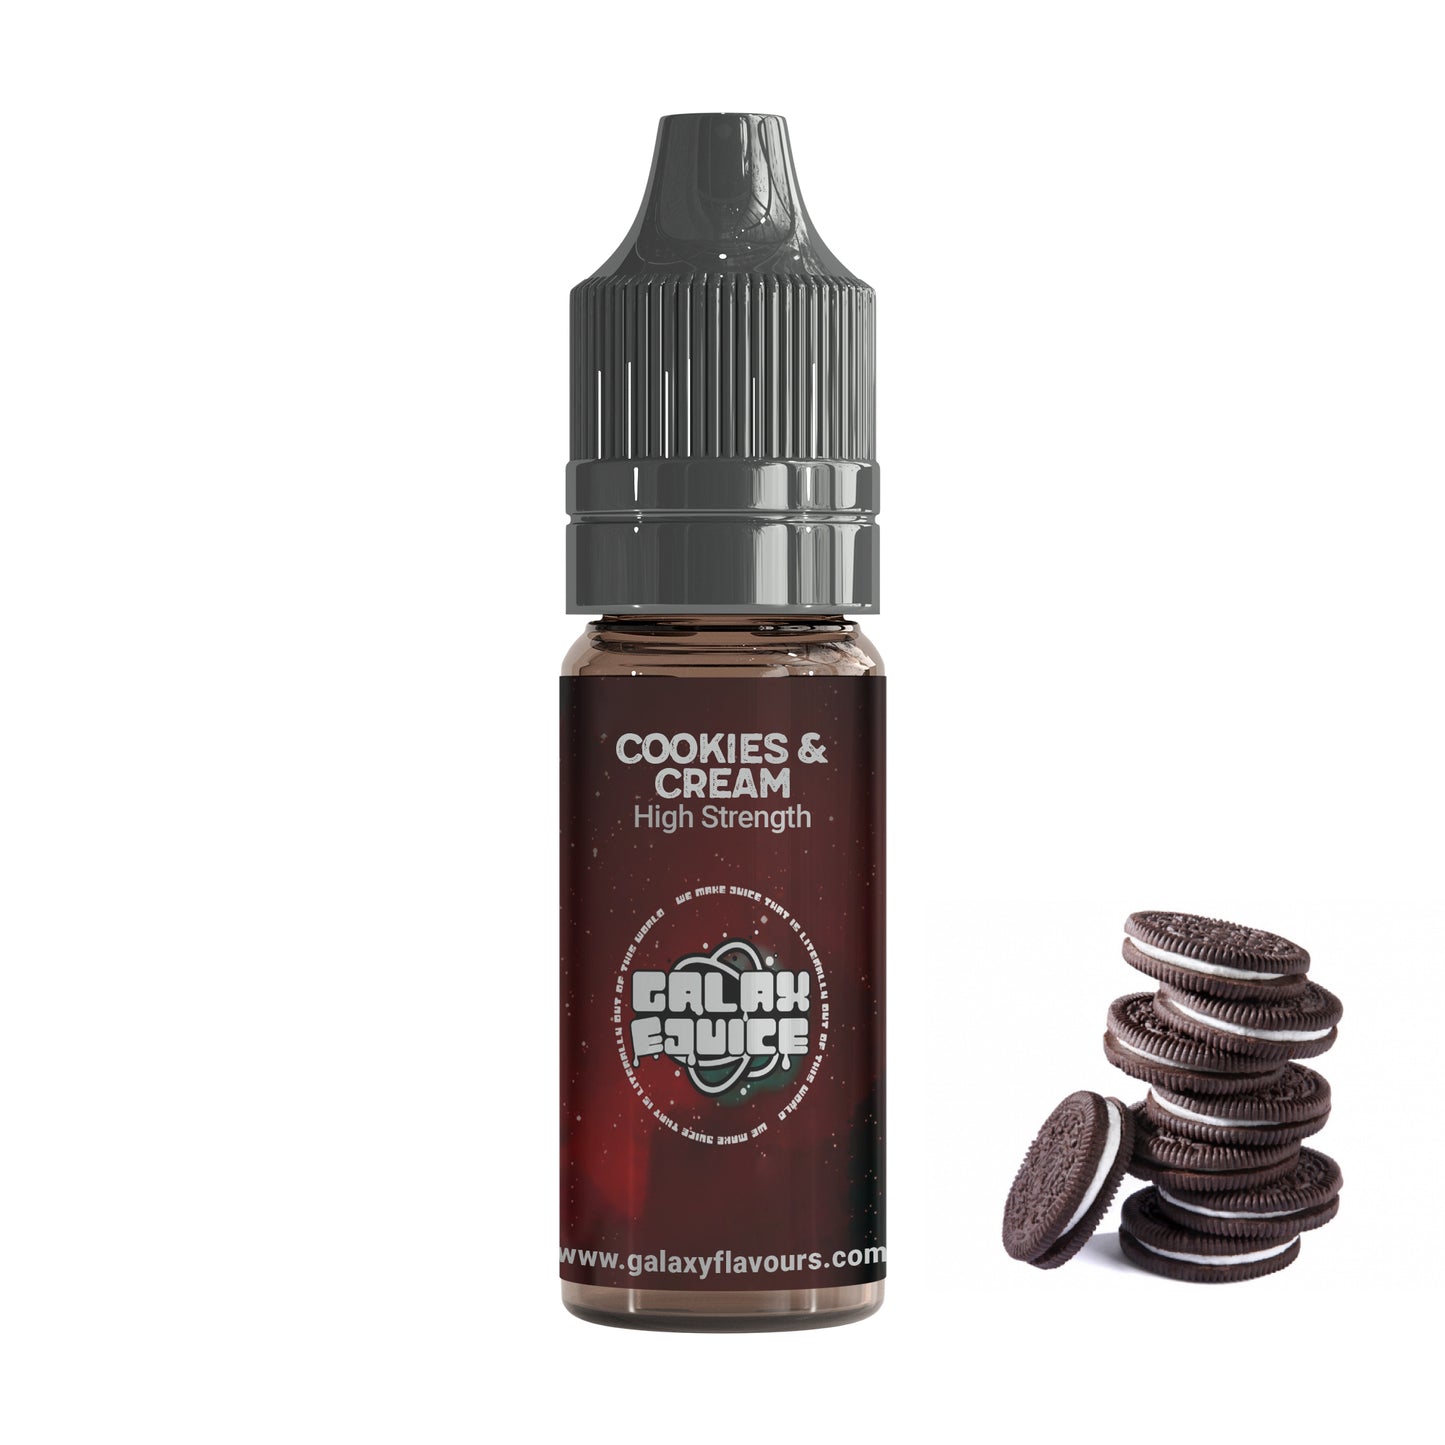 Cookies and Cream High Strength Professional Flavouring.